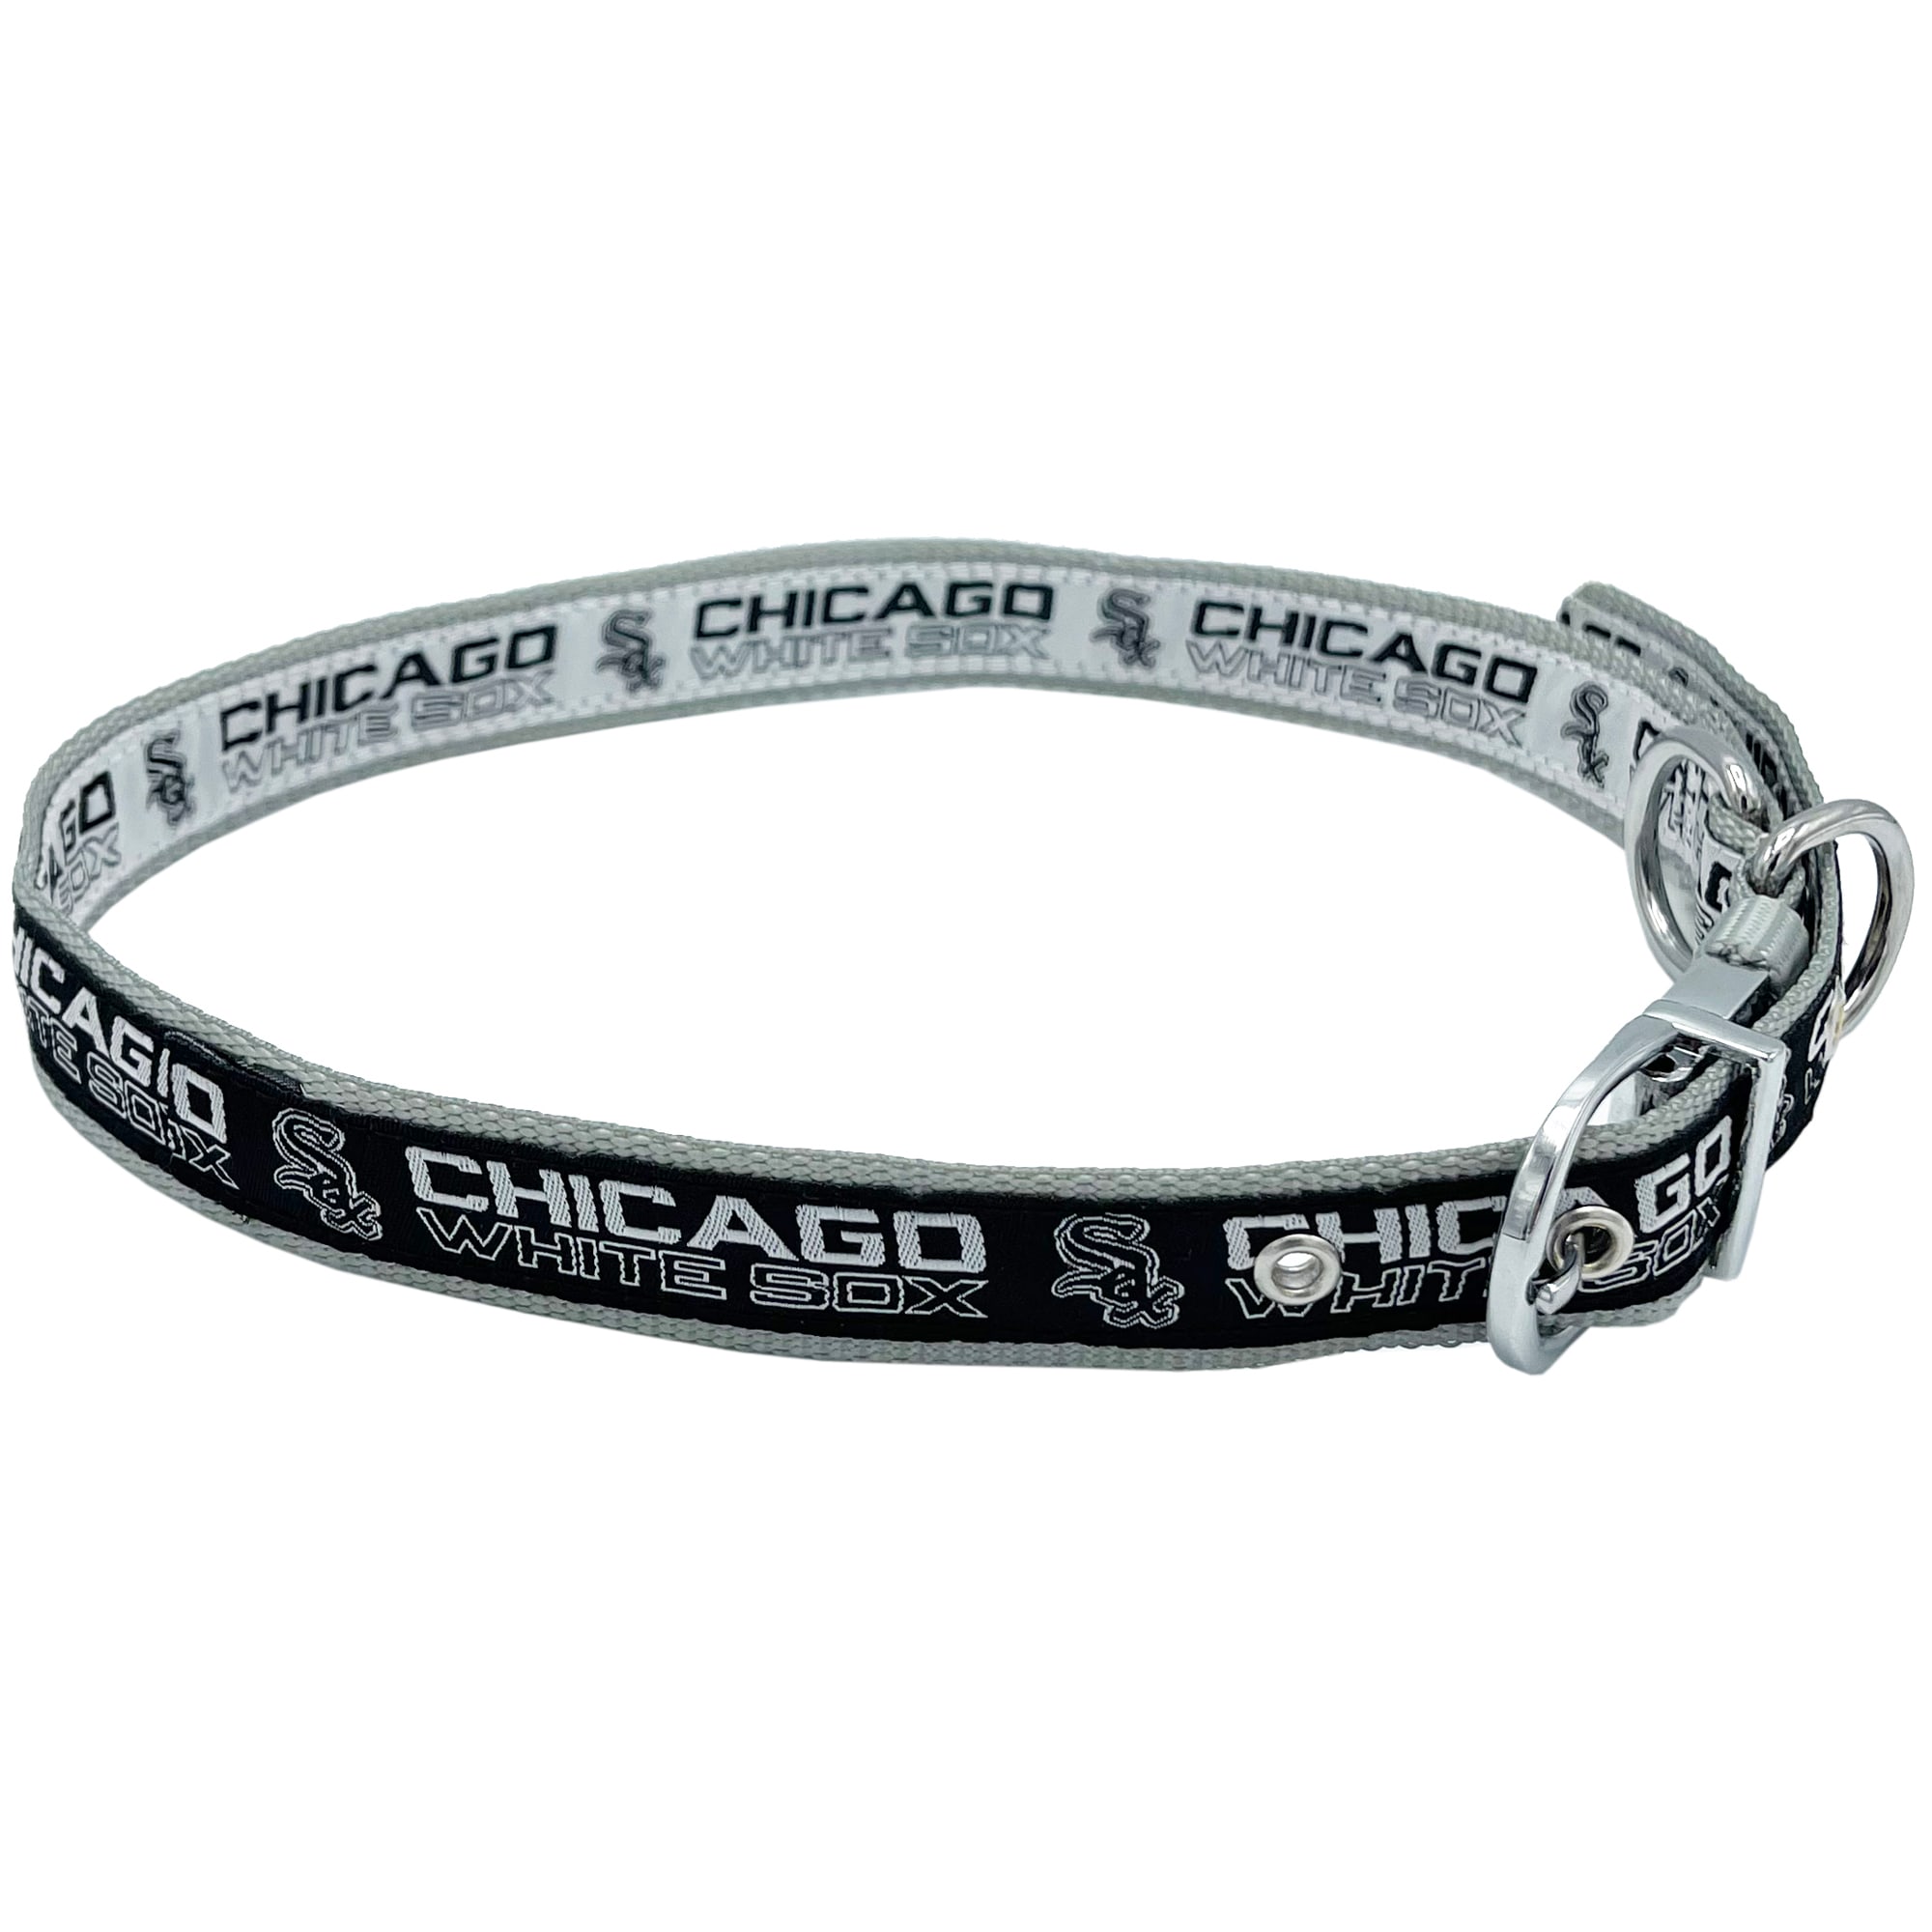 Official Chicago White Sox Pet Gear, White Sox Collars, Leashes